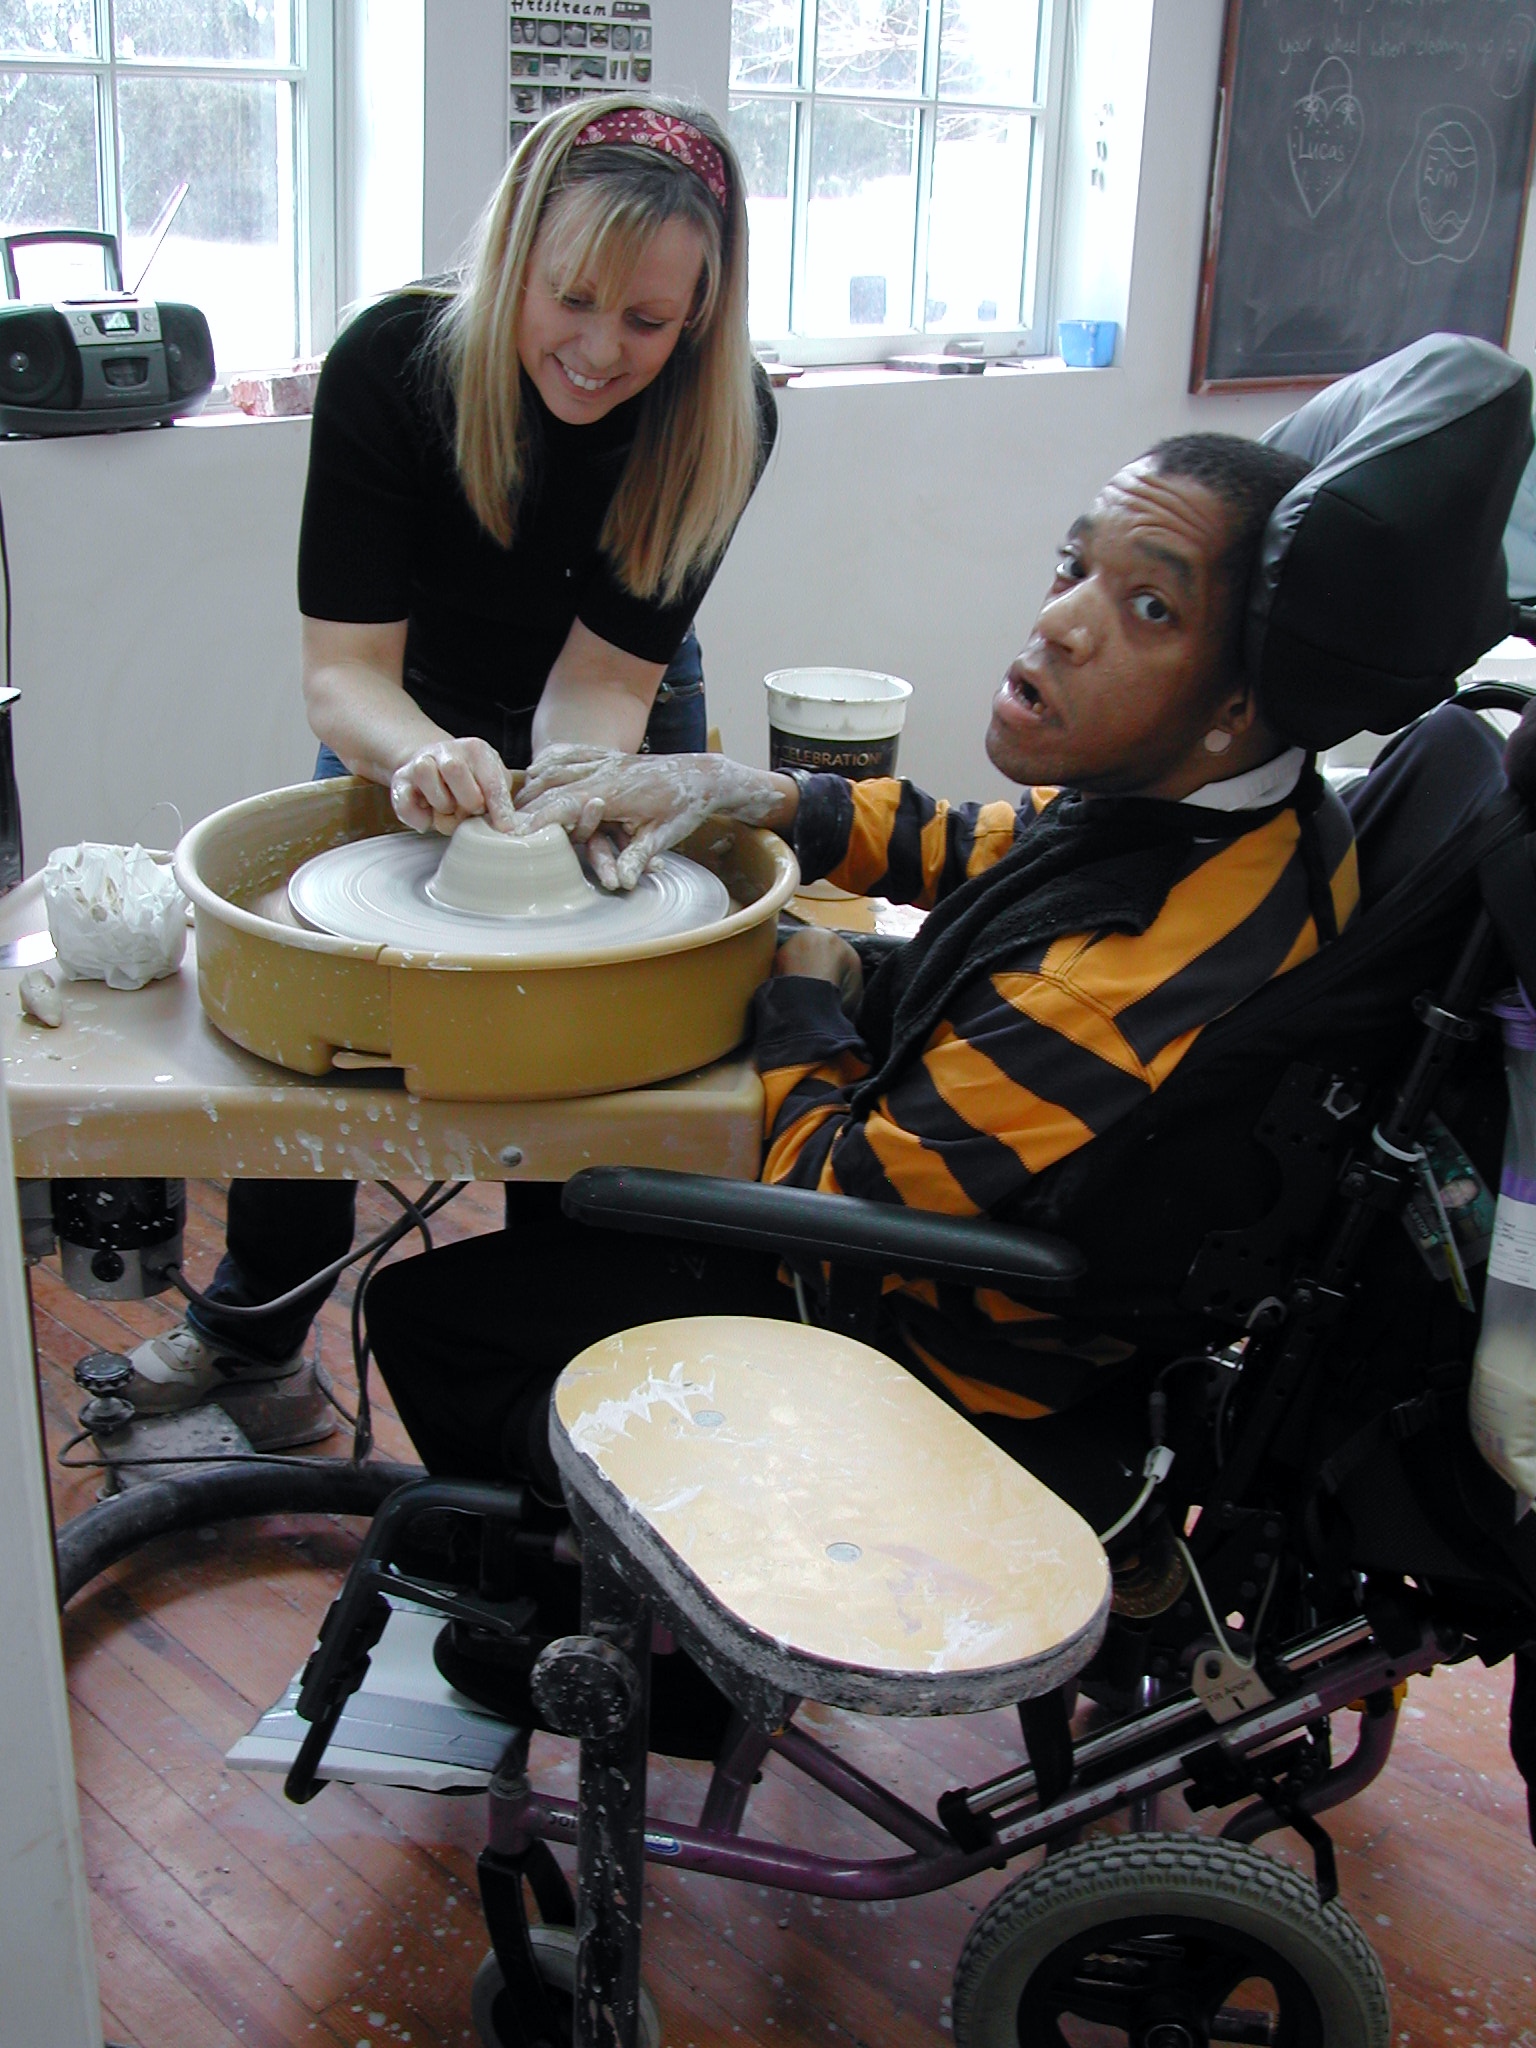 Jodi Bonthron from Matheny Ceramics works with Dion on the wheel